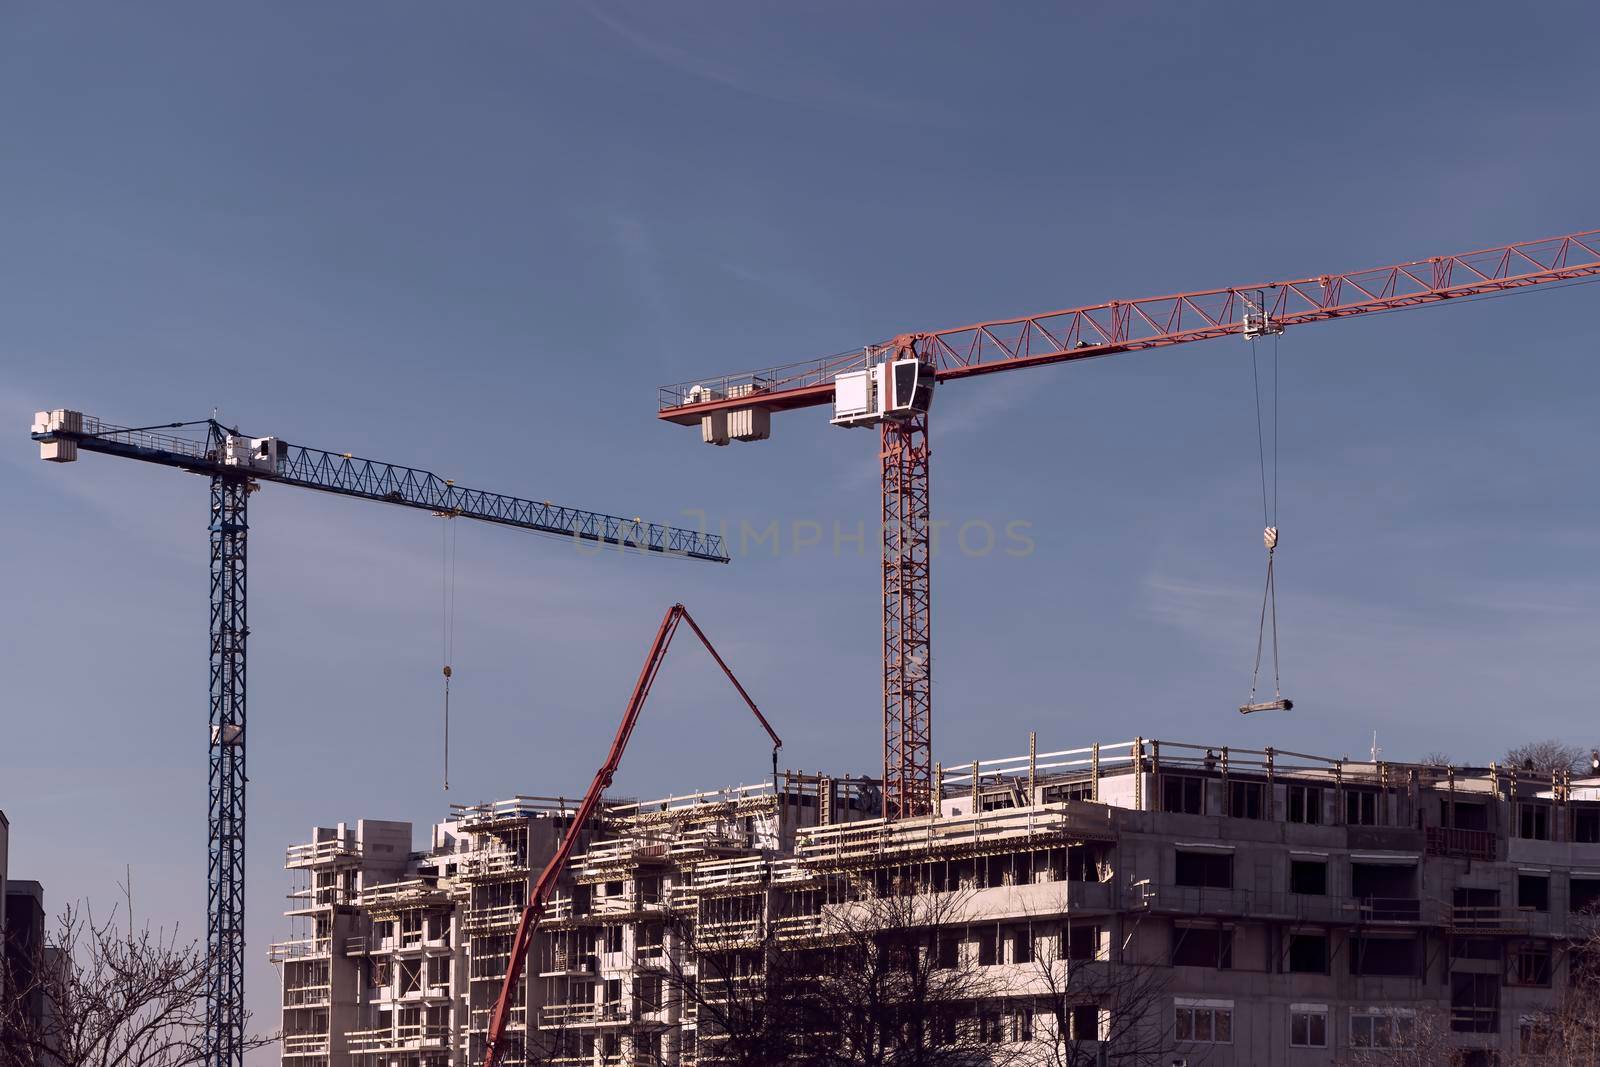 construction of new residential flats